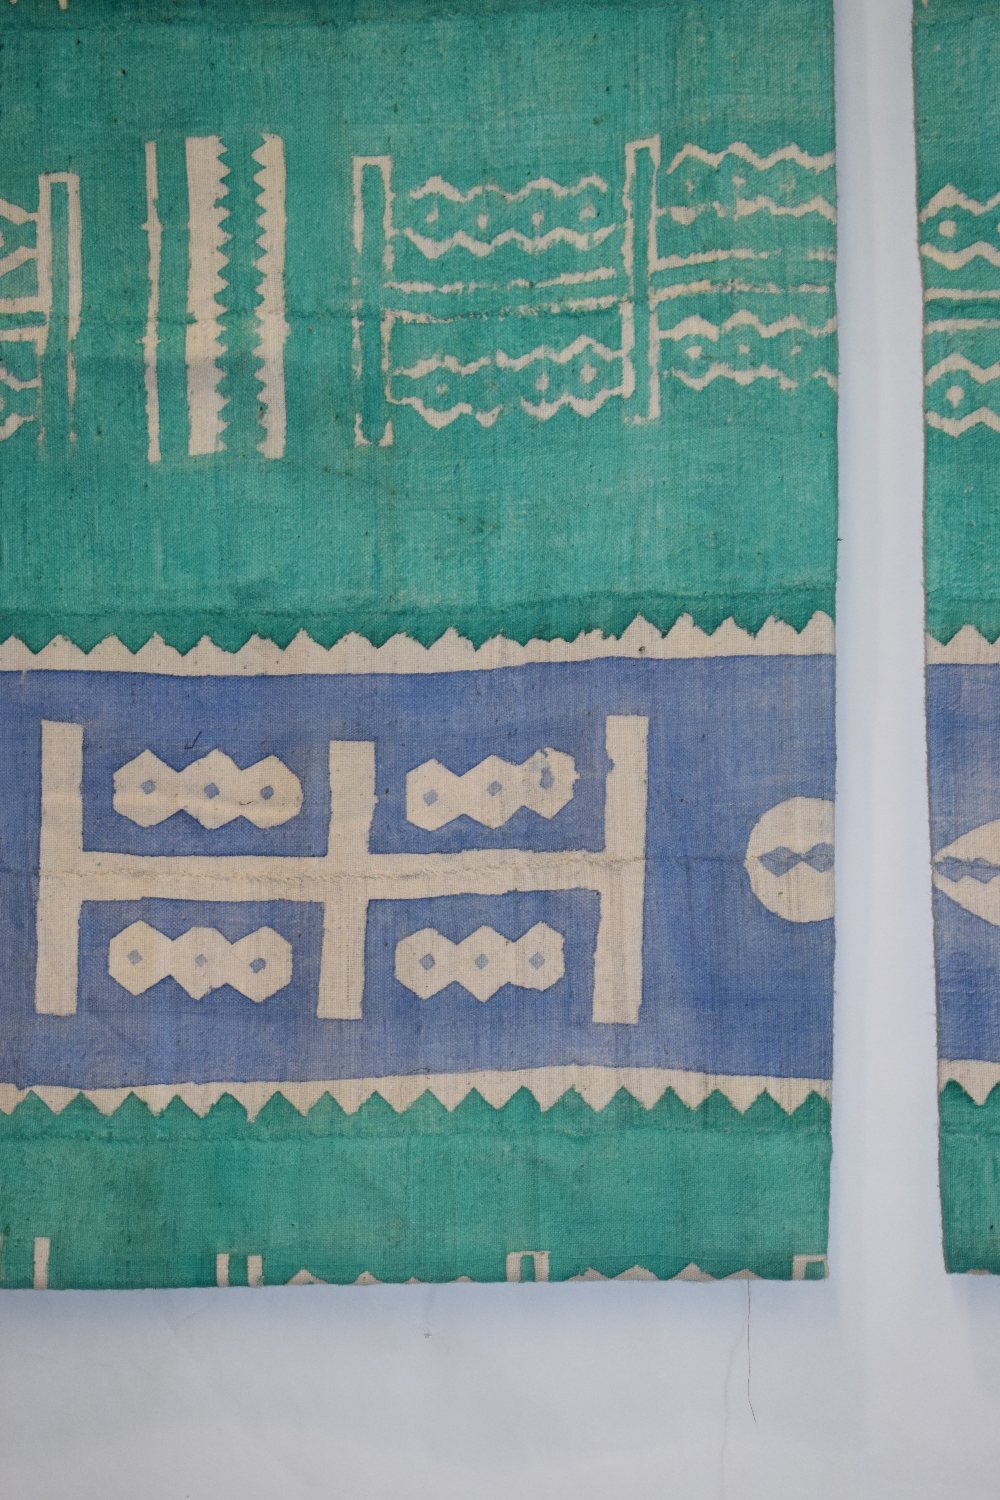 Five African 'Mud' or Bogolan cloths, Mali, west Africa, 20th century, the cotton strips dyed in - Image 17 of 31